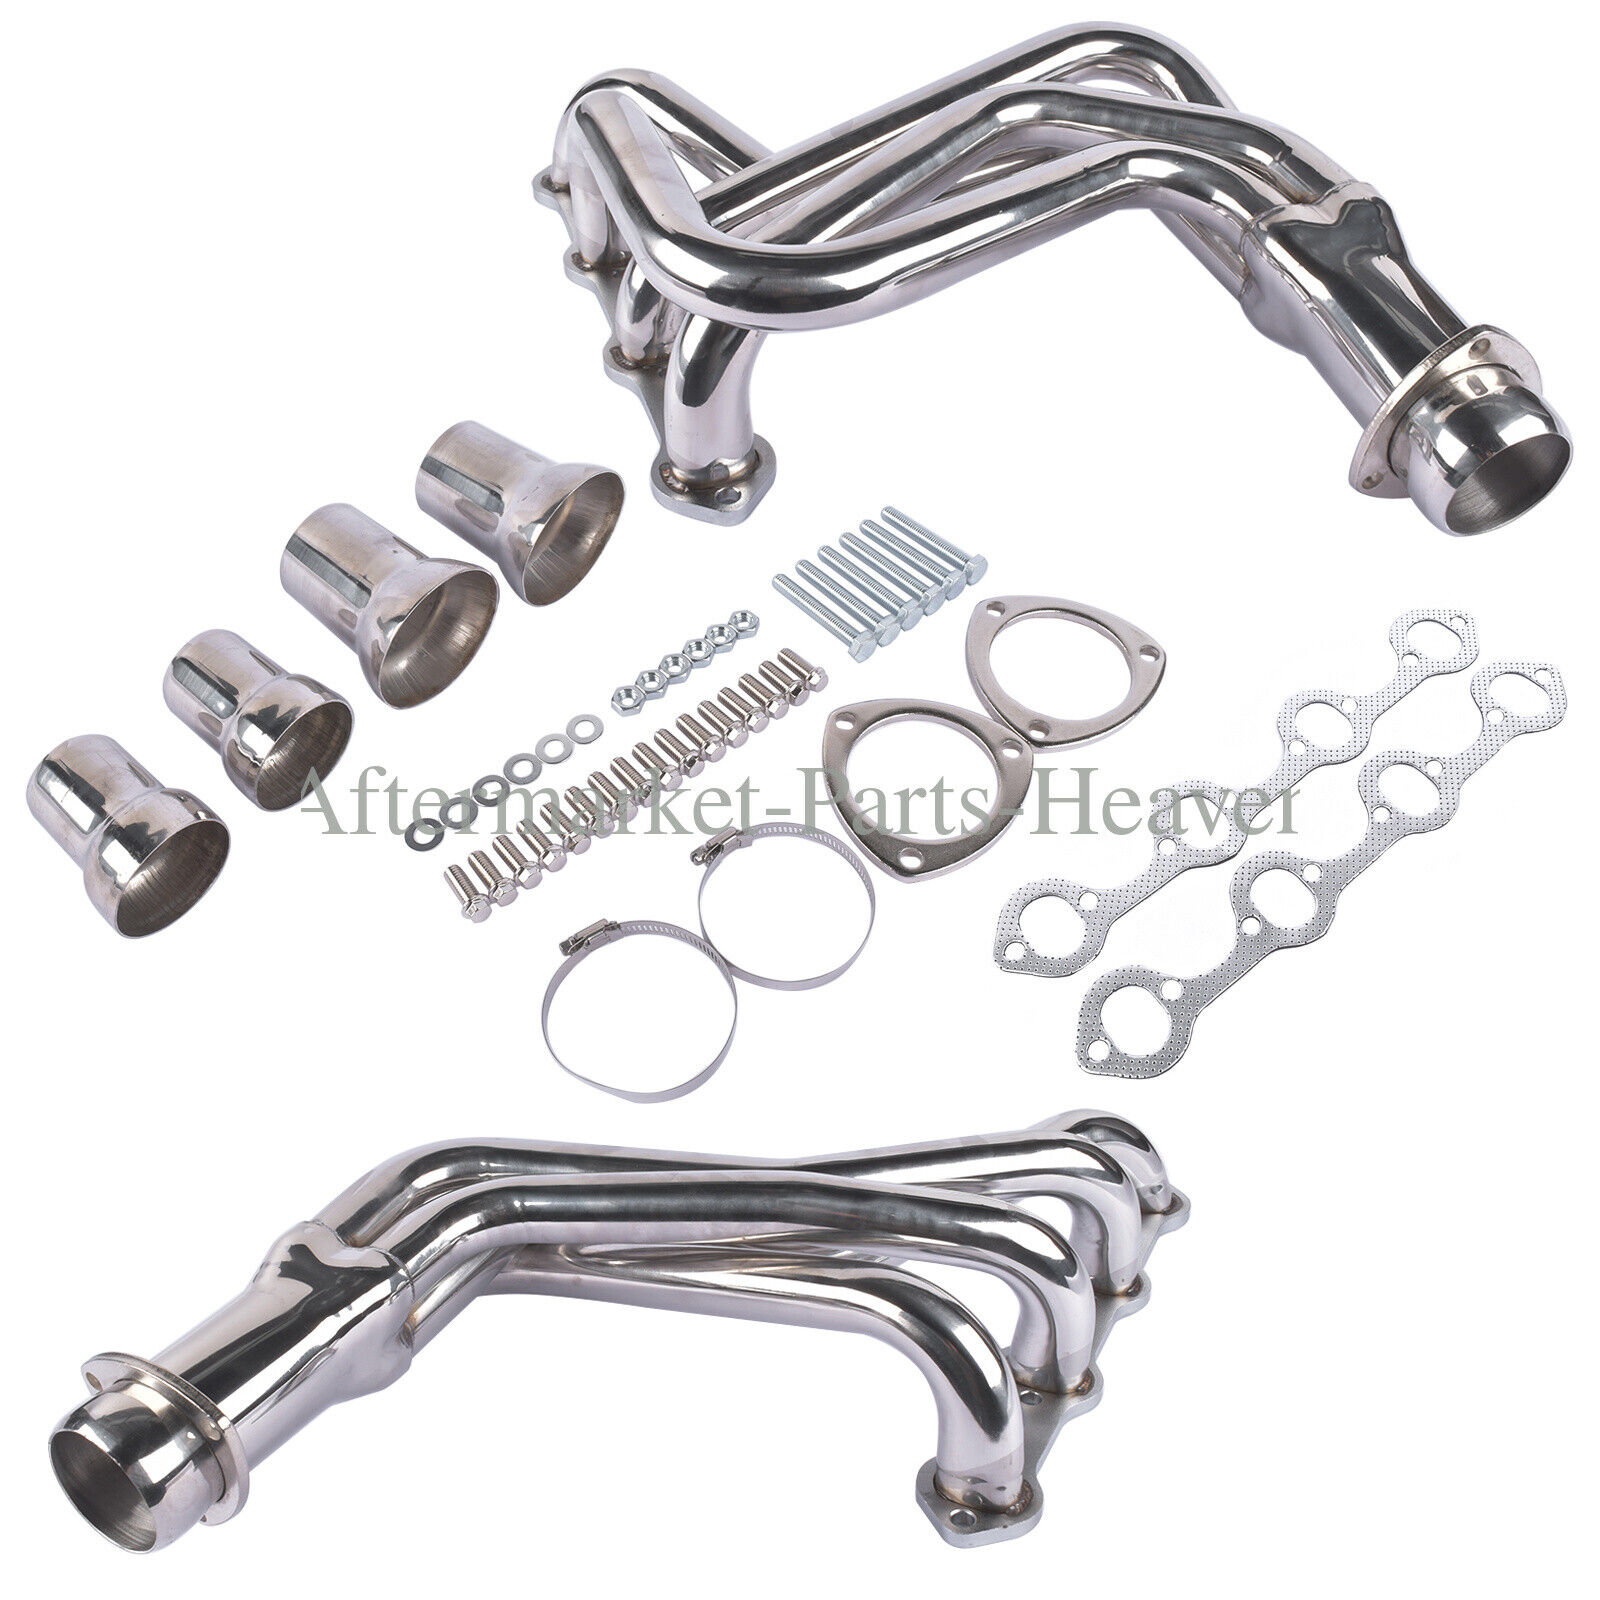 Exhaust Manifold Headers for Ford F-100 1969-1979 5.0L RWD 302 Stainless Steel